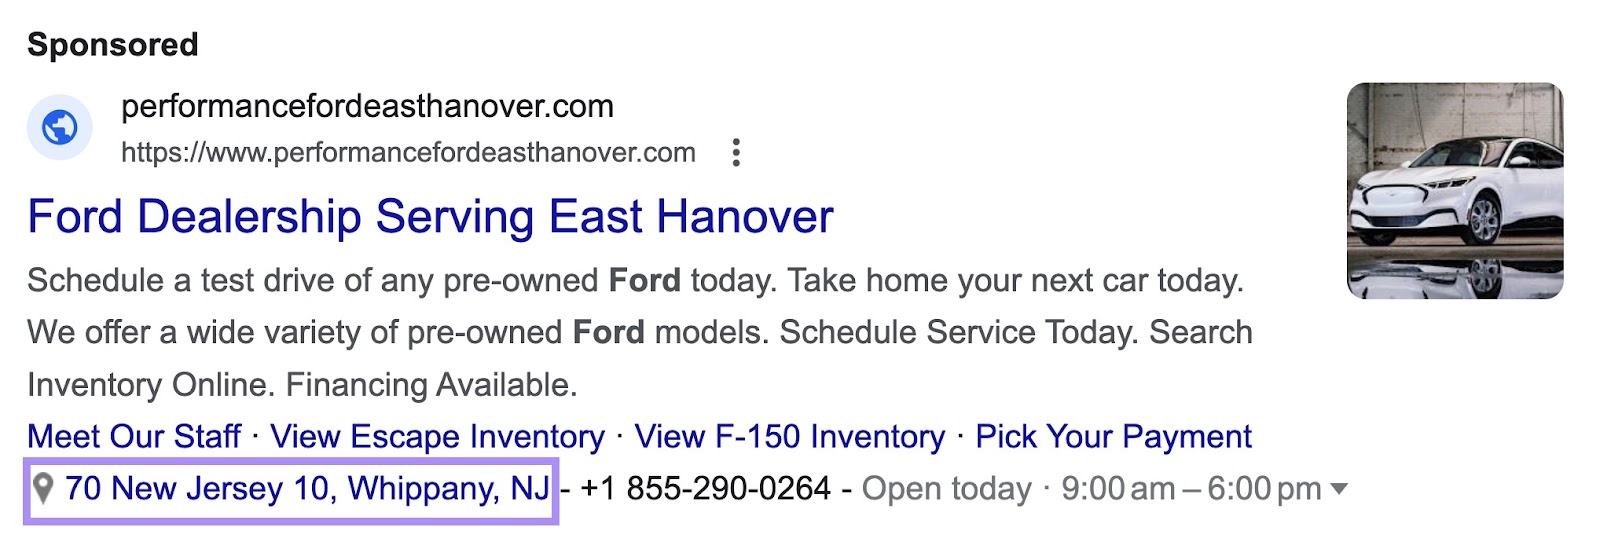 A location extension under Ford dealership in New Jersey search ad